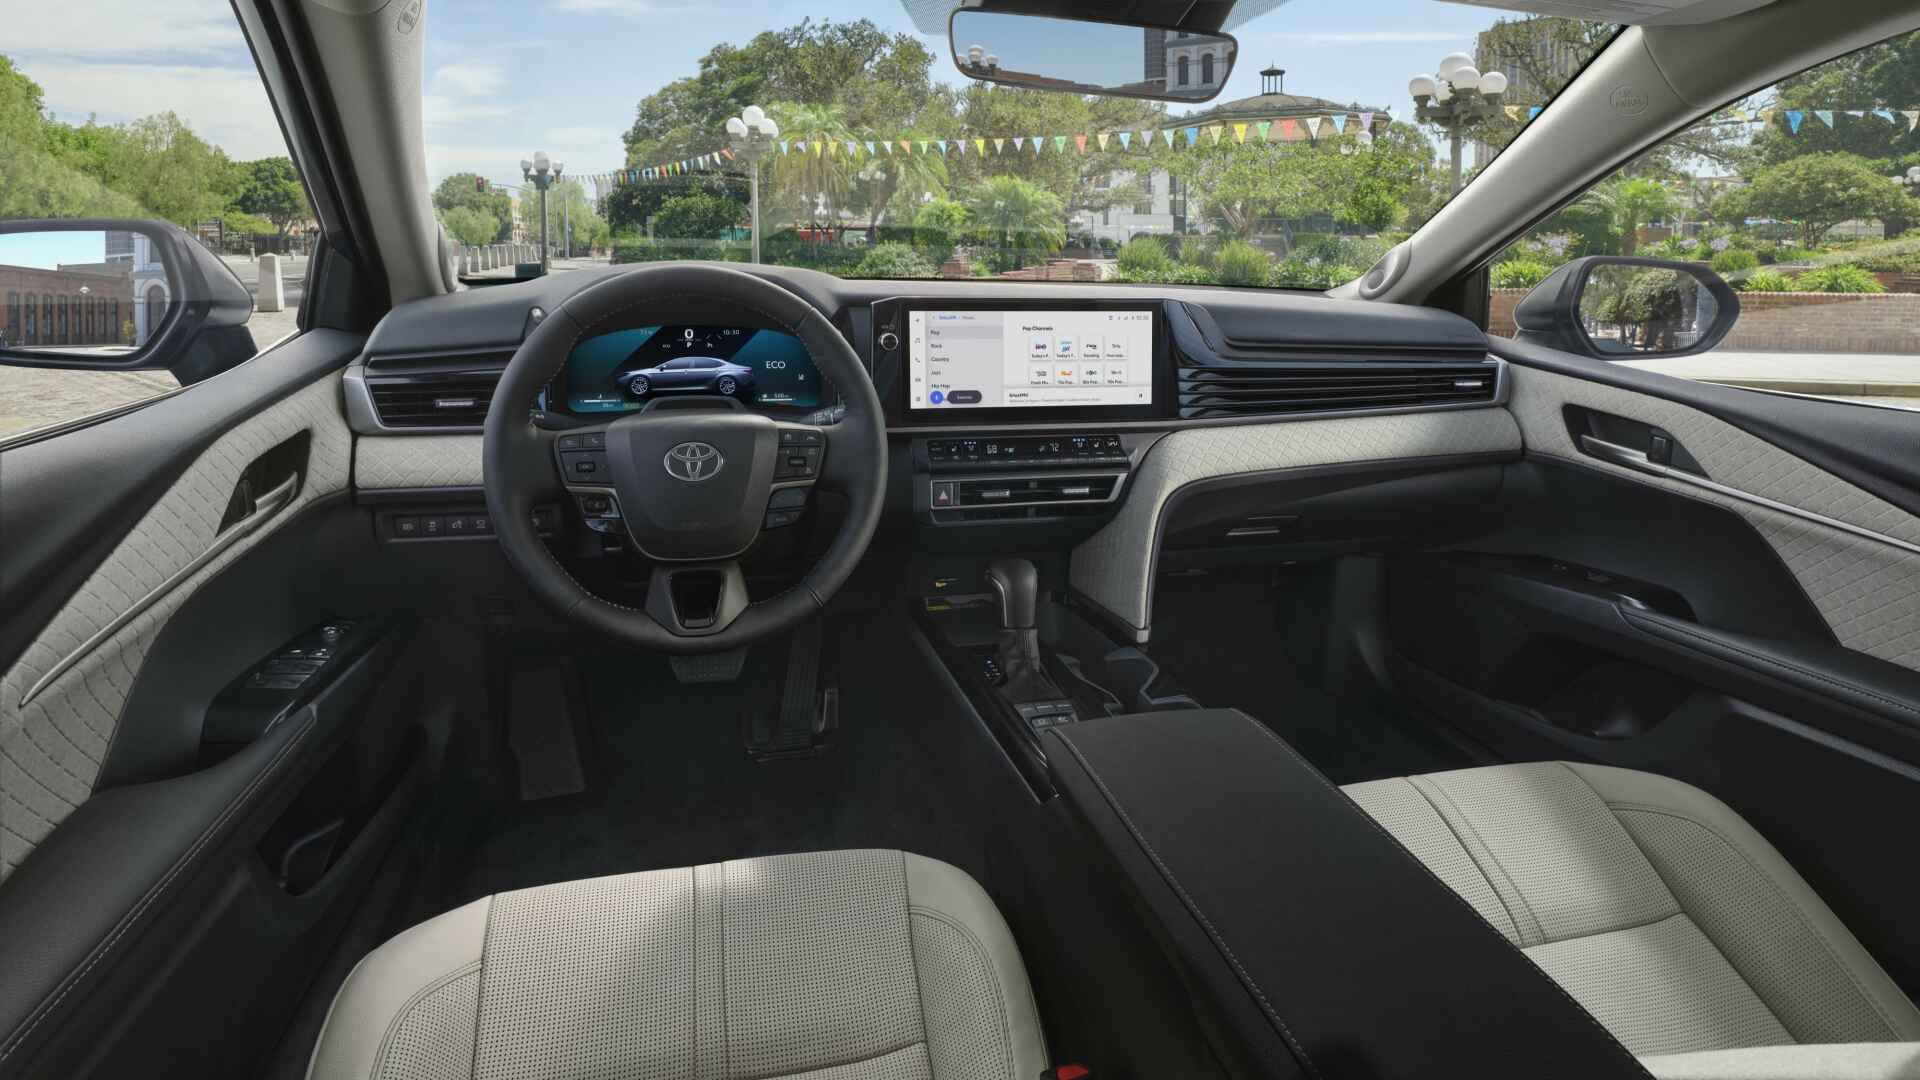 The Interior, Steering, Dashboard, And Central Console Of A 2025 Toyota Camry (Credits Toyota Pressroom)